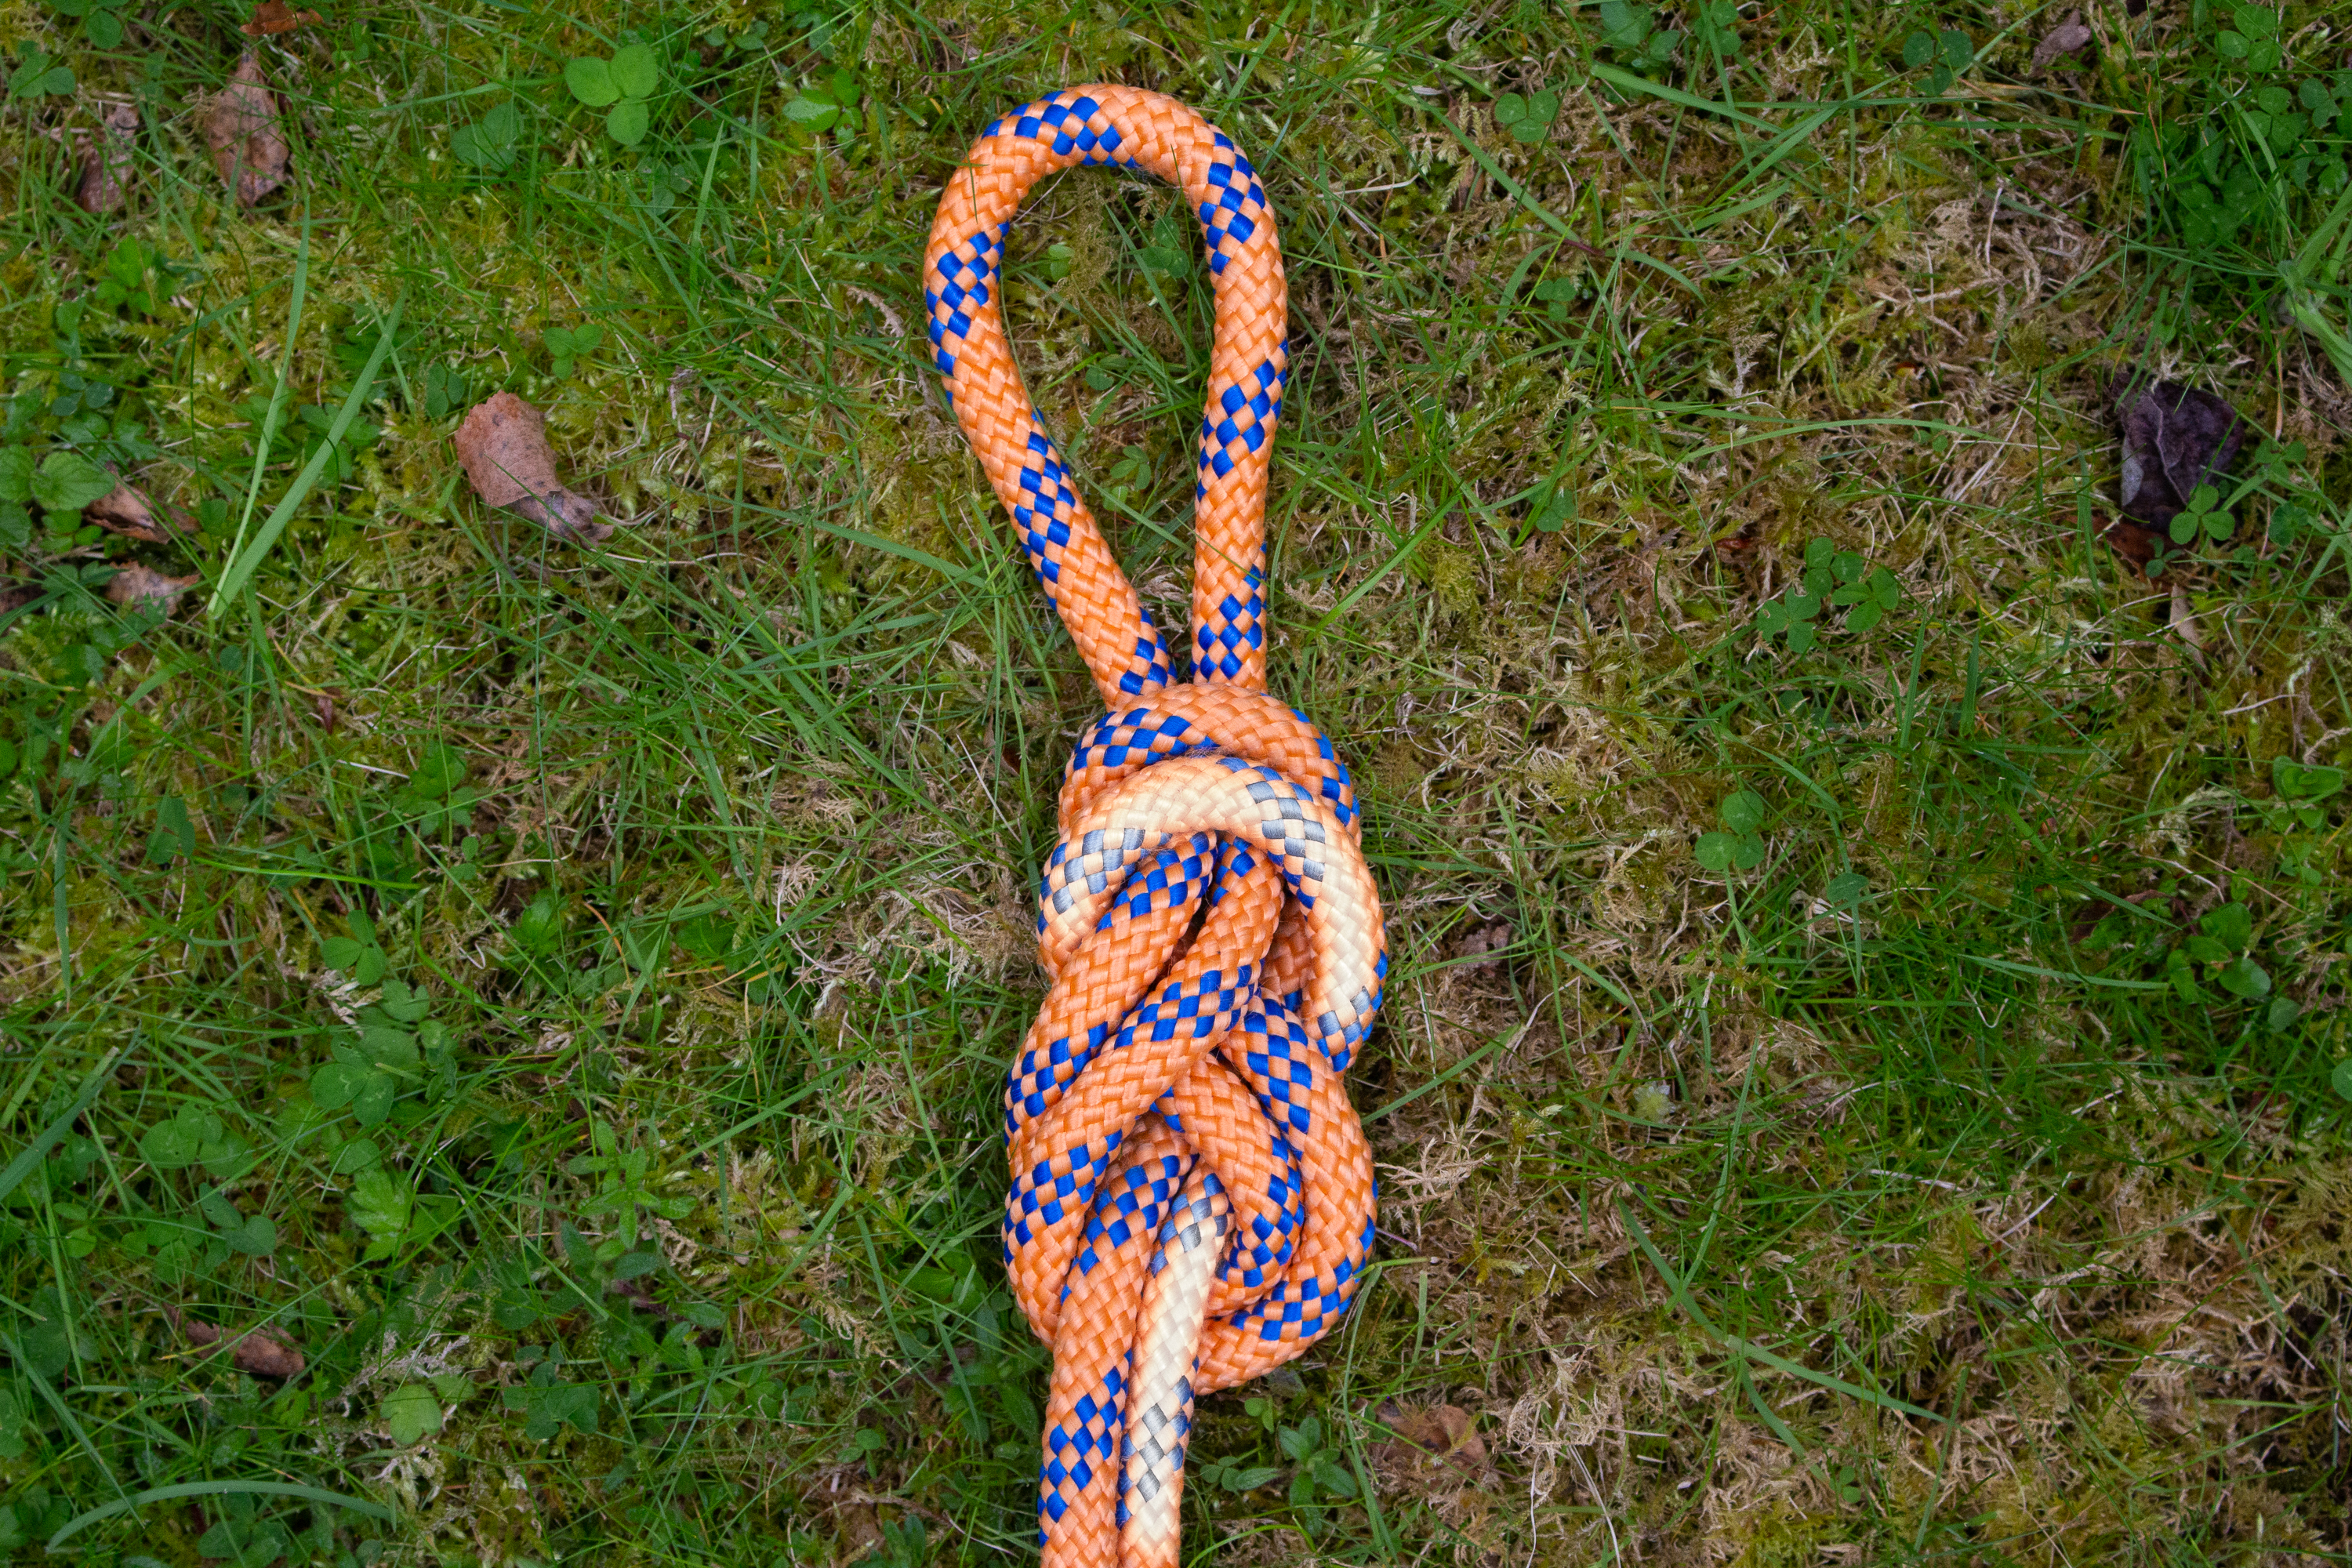 Learn How to Tie a Double Loop Figure 8